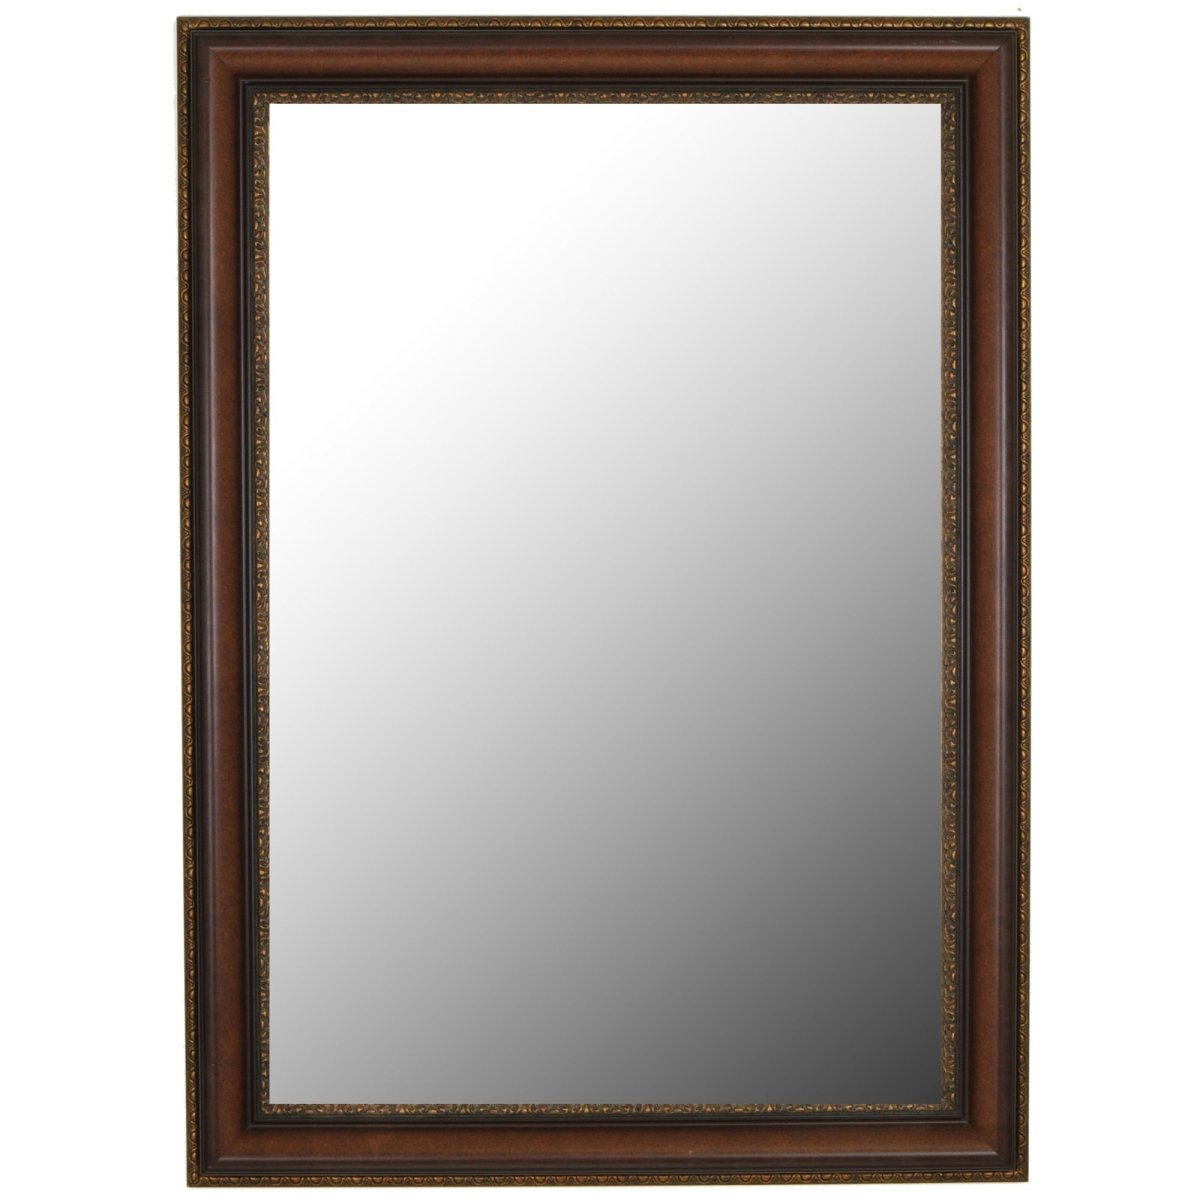 Hitchcock Butterfield 810500 Brown Janette Wall Mirror - 26.5 X 36.5 In.